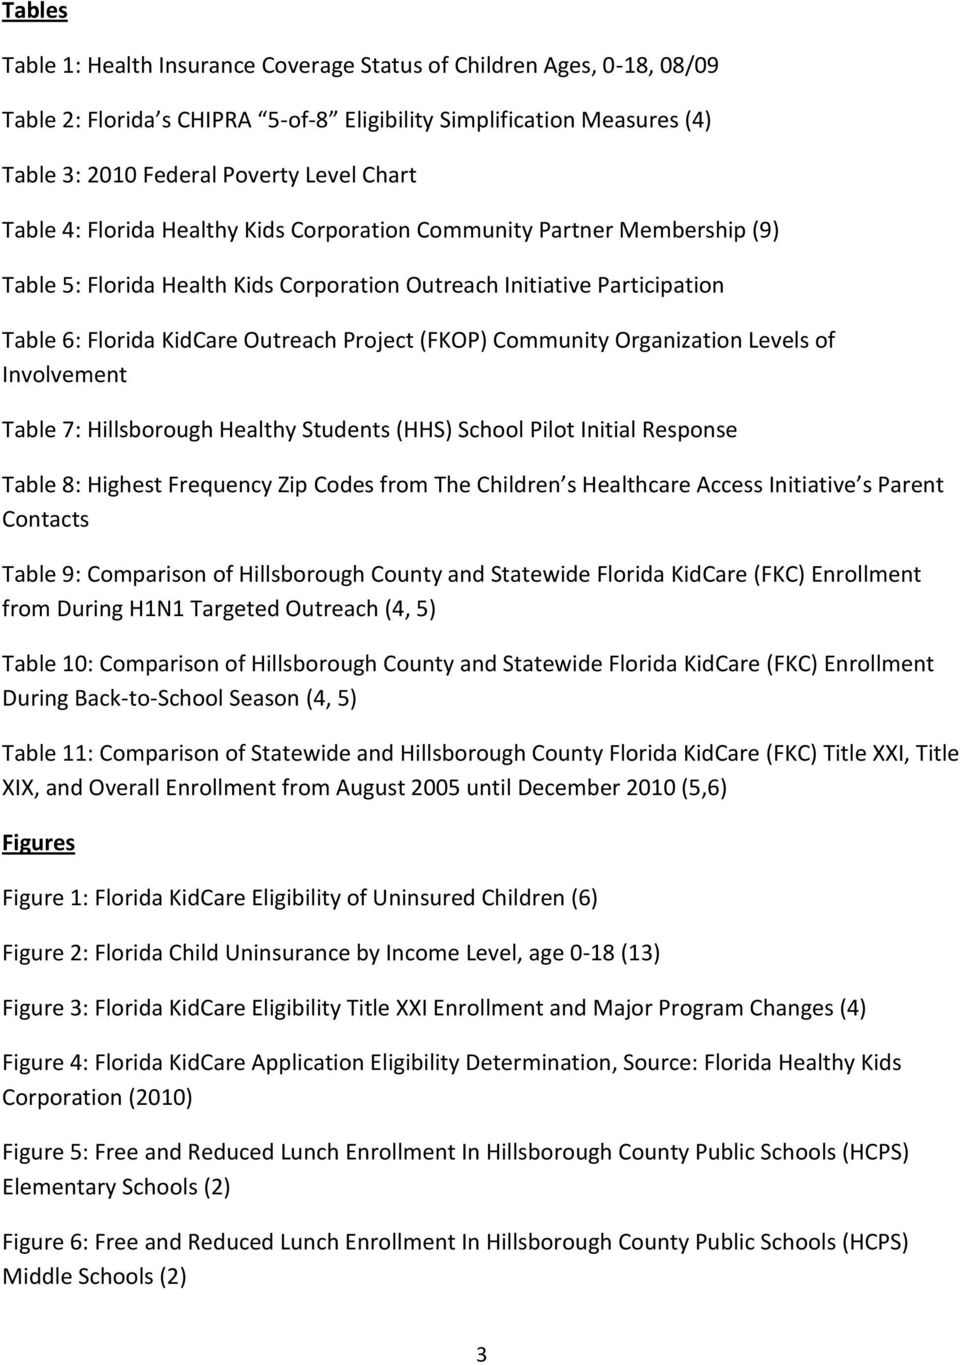 Florida Kidcare Income Eligibility Chart 2015